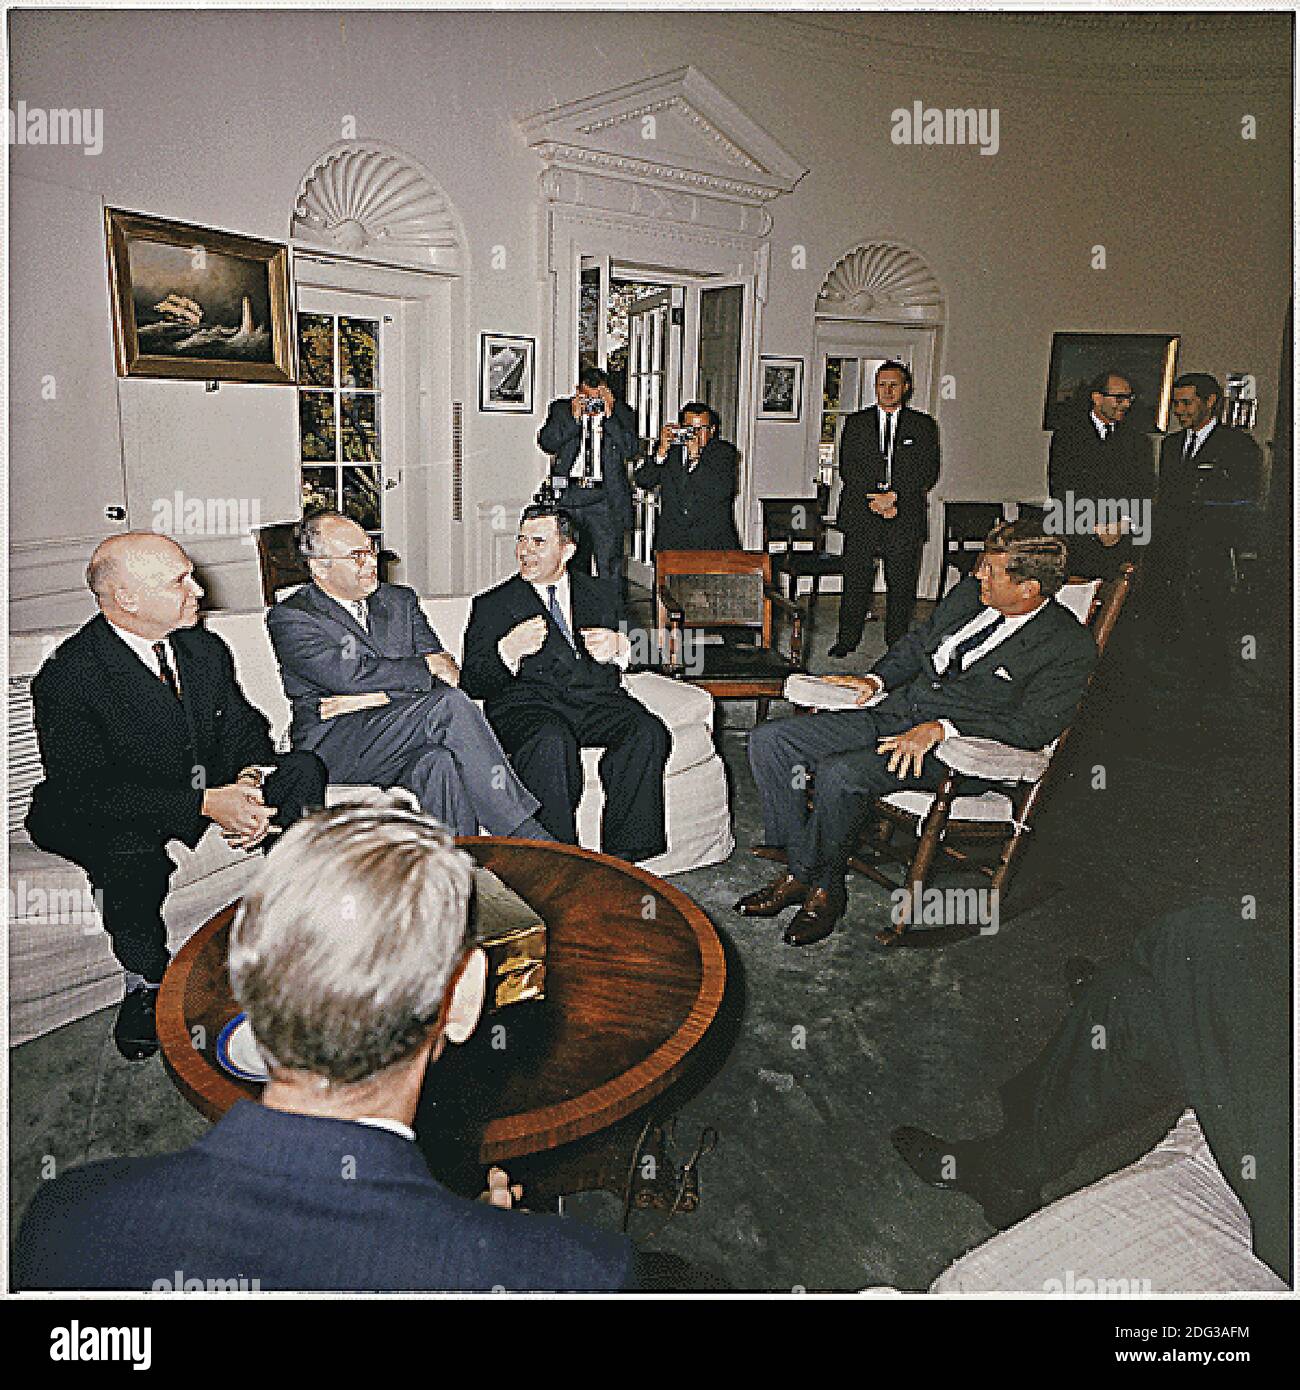 Washington, DC -- United States President John F. Kennedy meets with Soviet officials in the Oval Office of the White House in Washington, DC, USA, on October 18, 1962. Left to right: Soviet Deputy Minister Vladimir S. Seyemenov, Ambassador of the USSR Anatoly F. Dobrynin, Soviet Minister of Foreign Affairs Andrei Gromyko, President Kennedy, photographers, aides. Photo by Robert Knudsen / White House via CNP Stock Photo